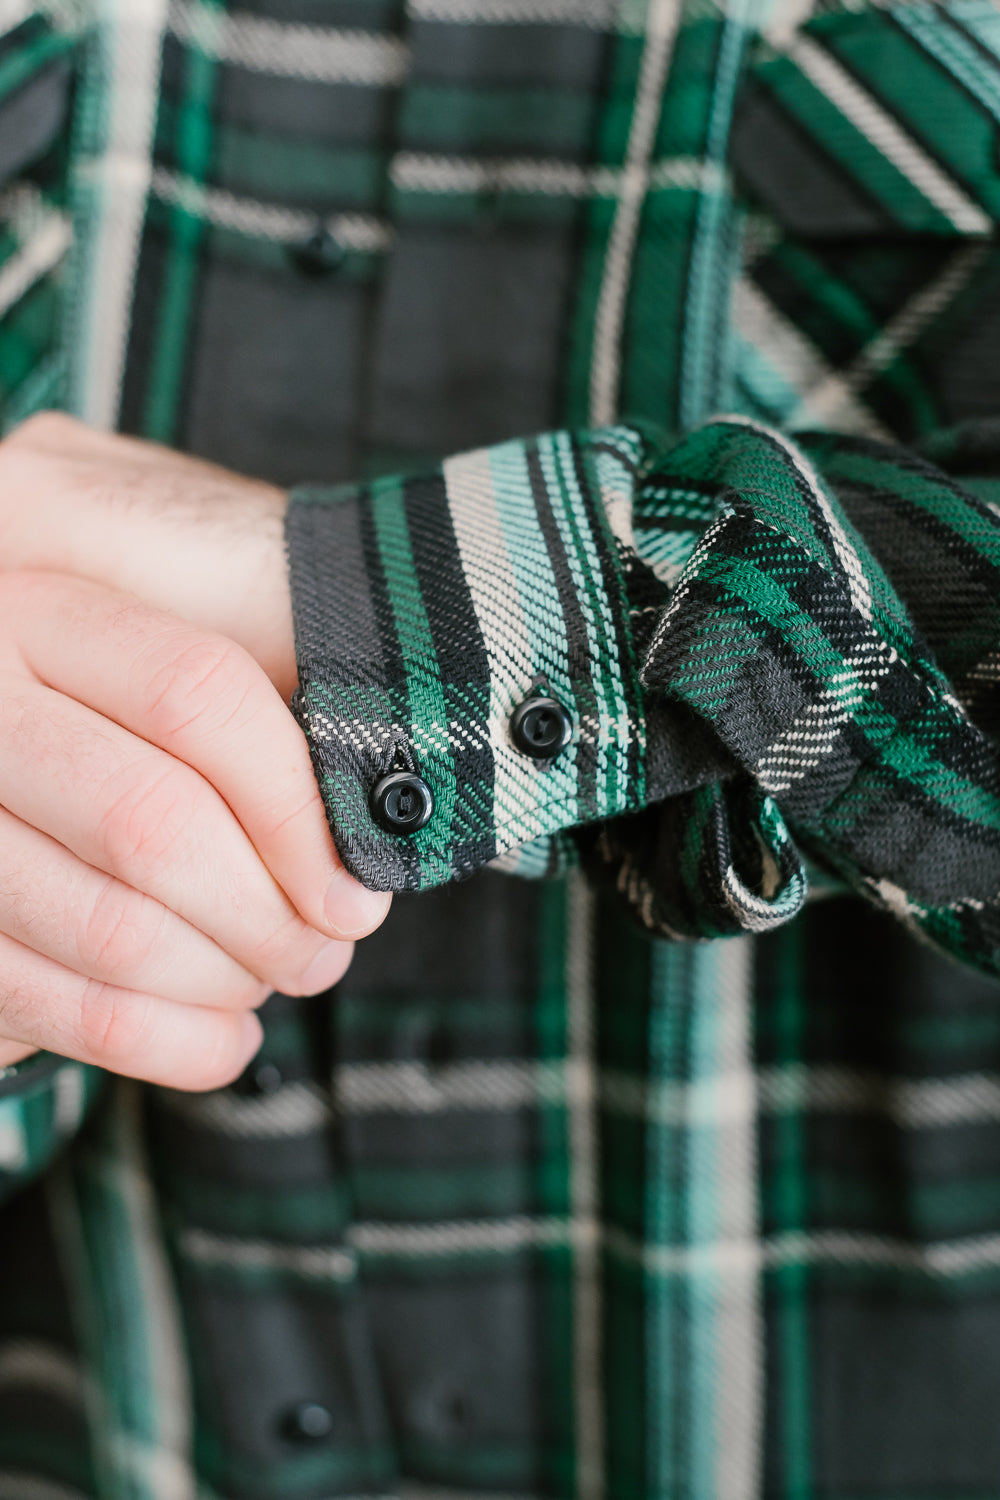 Bryson Check Flannel - Black, Green, White, Turquoise